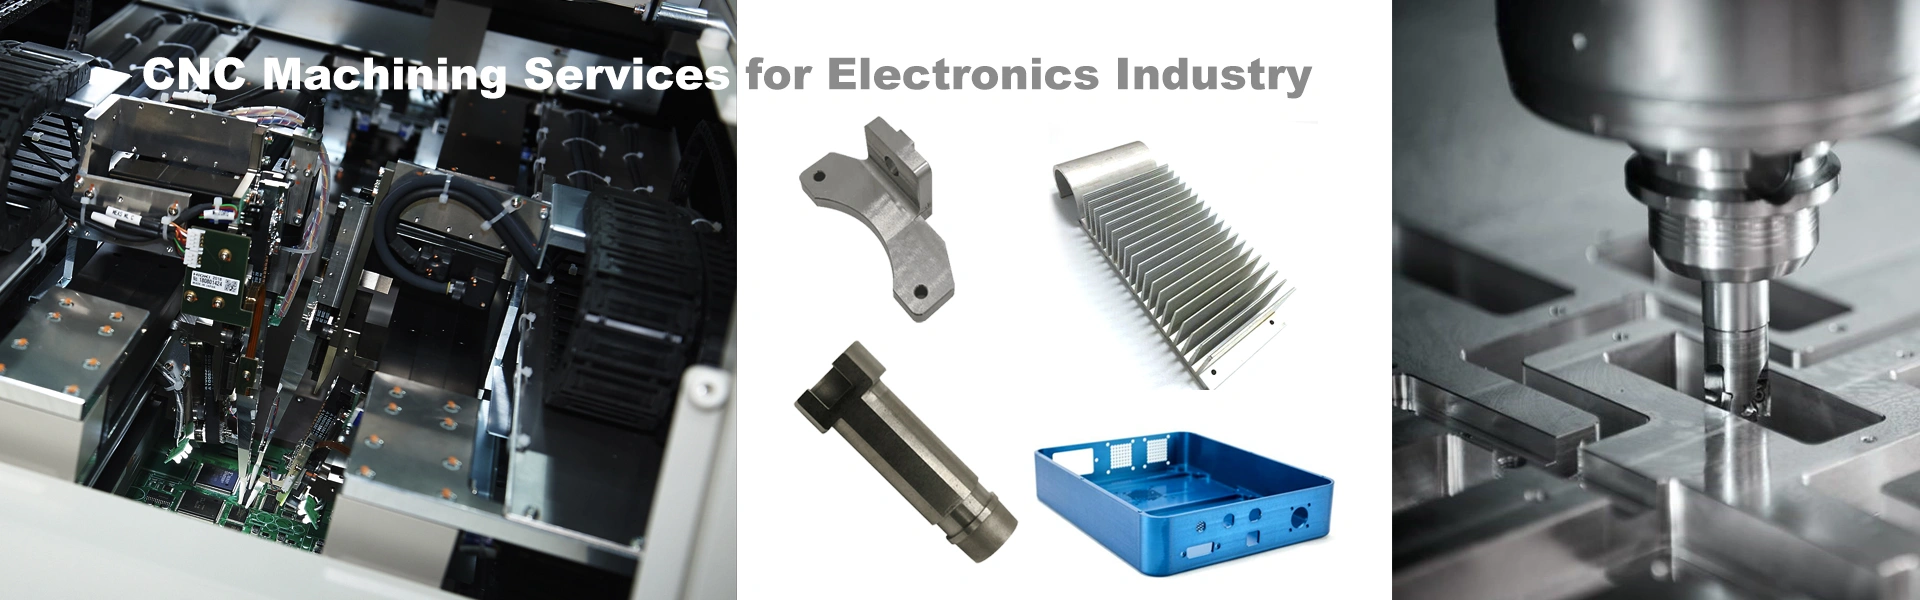 CNC Machining Services for Electronics Industry